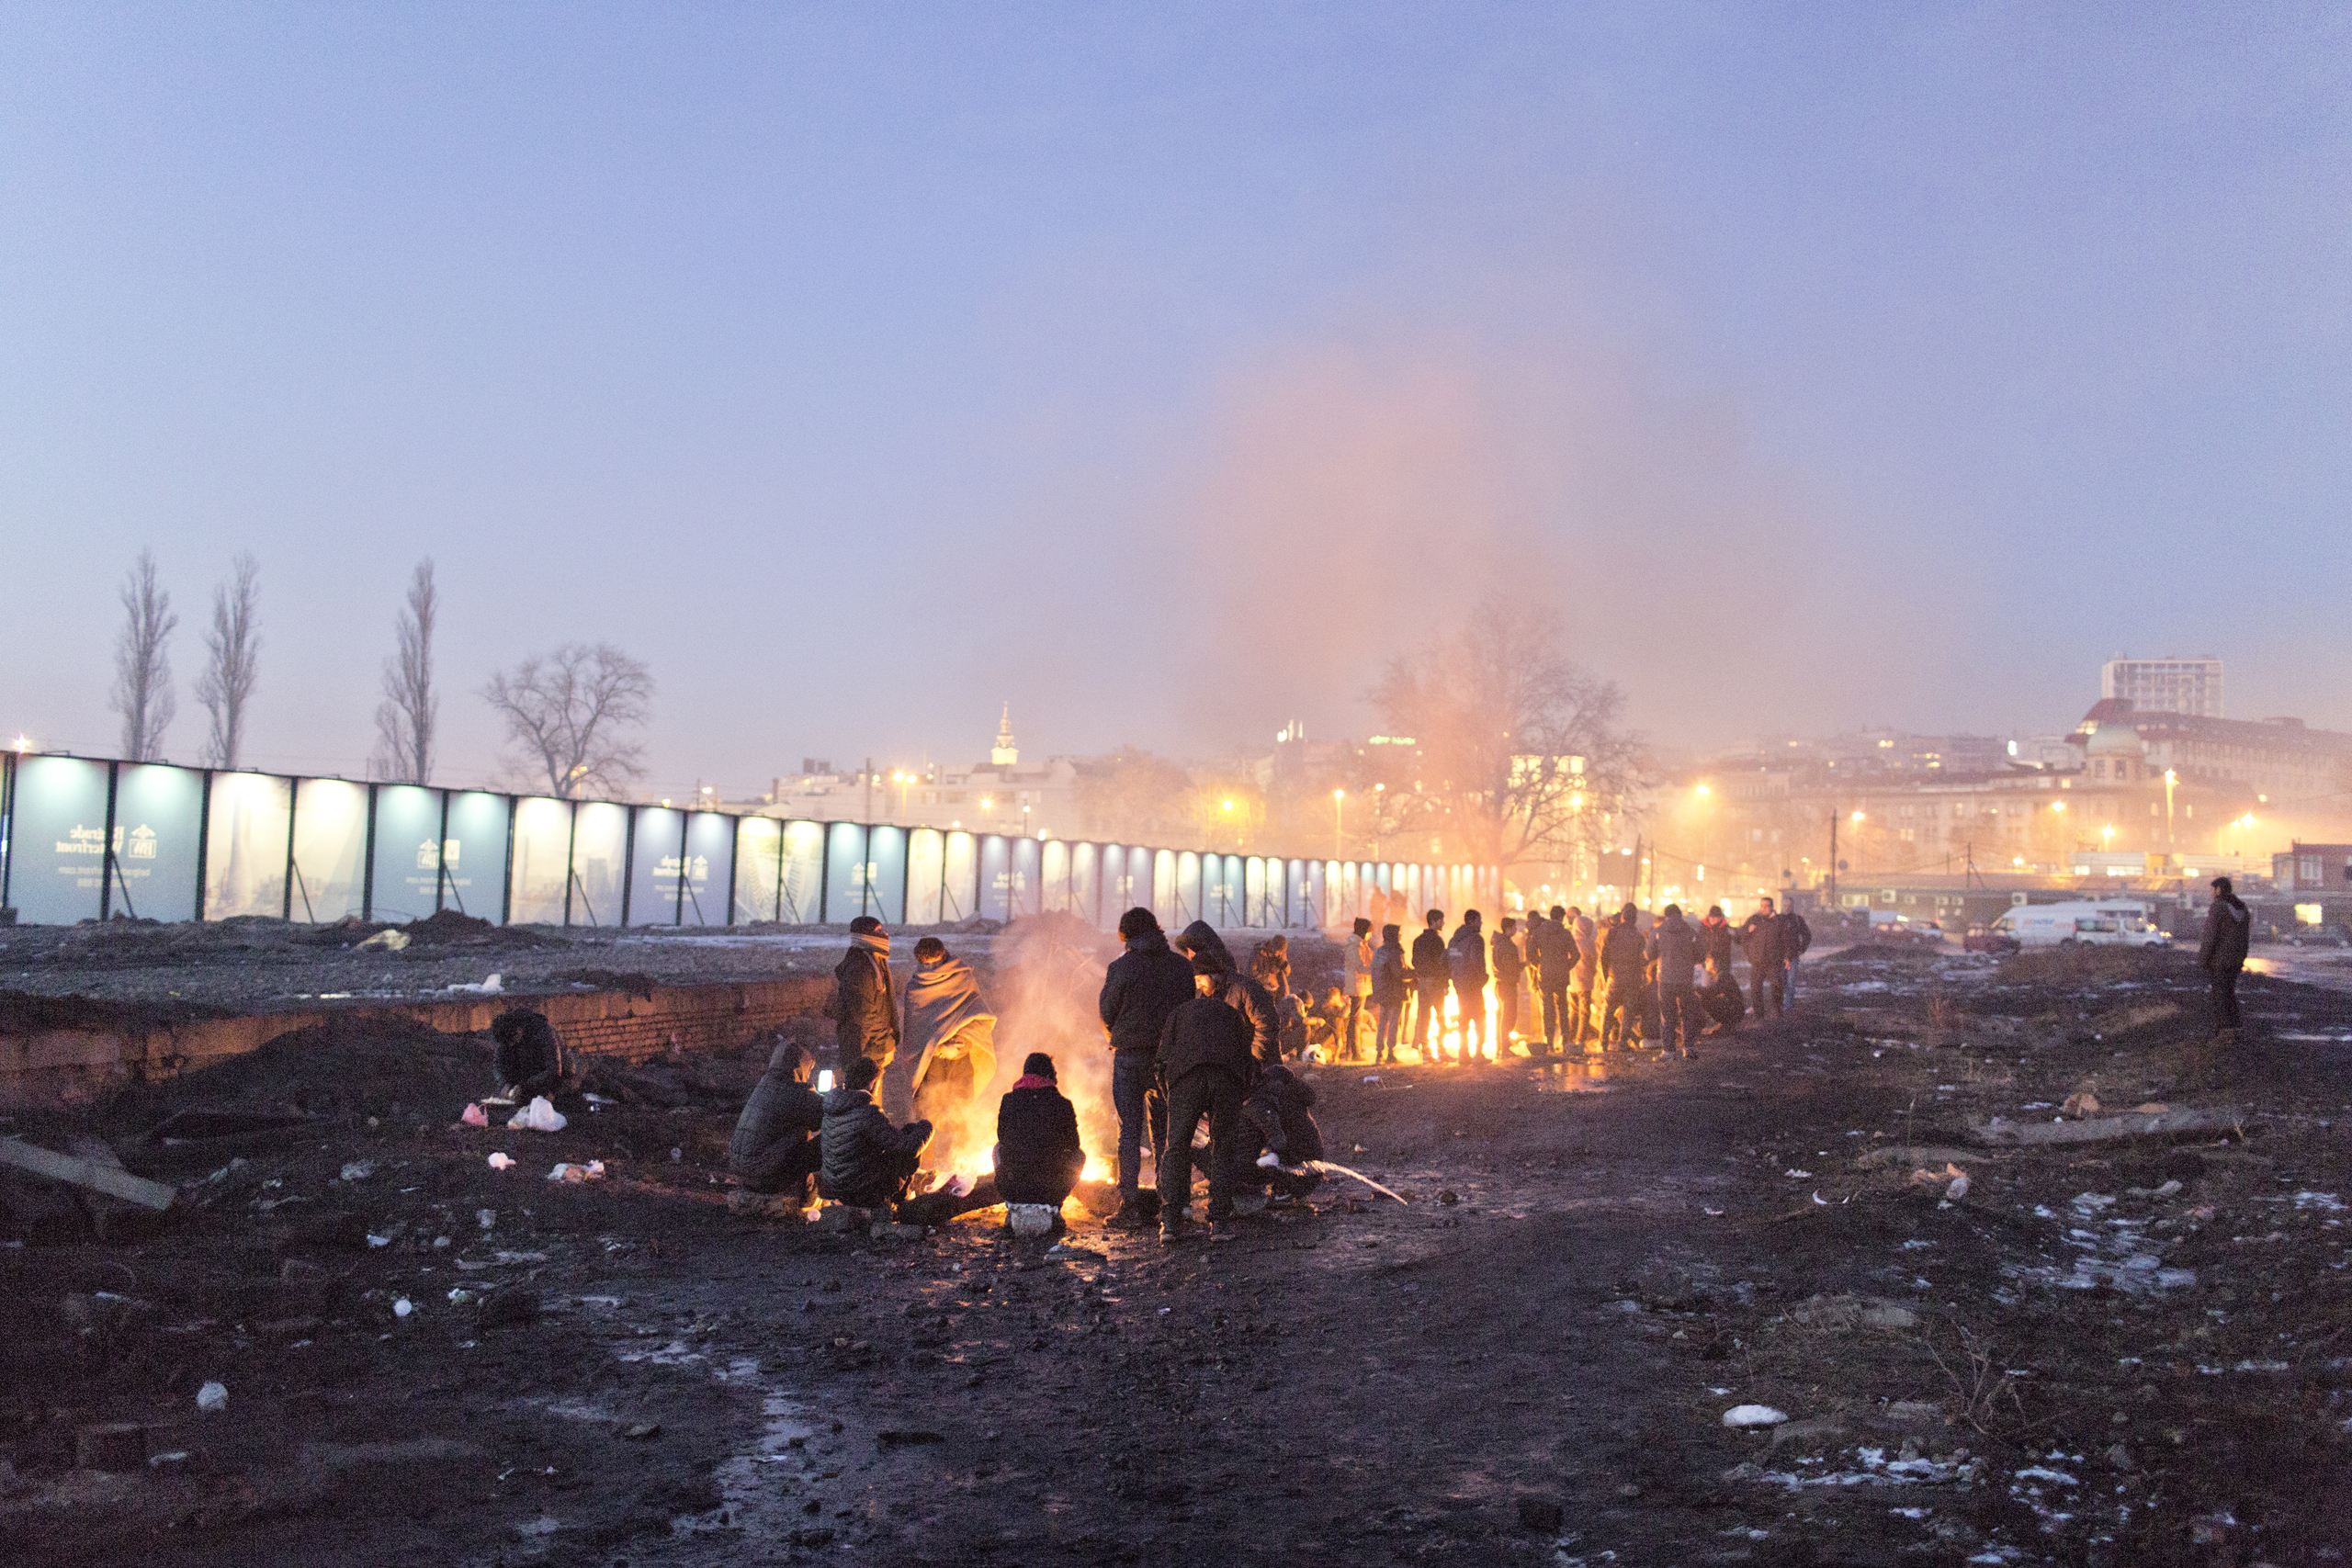 A group of migrants from Pakistan  and Afghanistan try to keep warm by a fire near an abandoned warehouse, Belgrade, Jan. 14, 2017.
                              
                              More than a thousand refugees, mostly Afghanis, live on the streets in central Belgrade. They live in terrible conditions and face freezing temperatures, while awaiting an opportunity to enter the European Union.